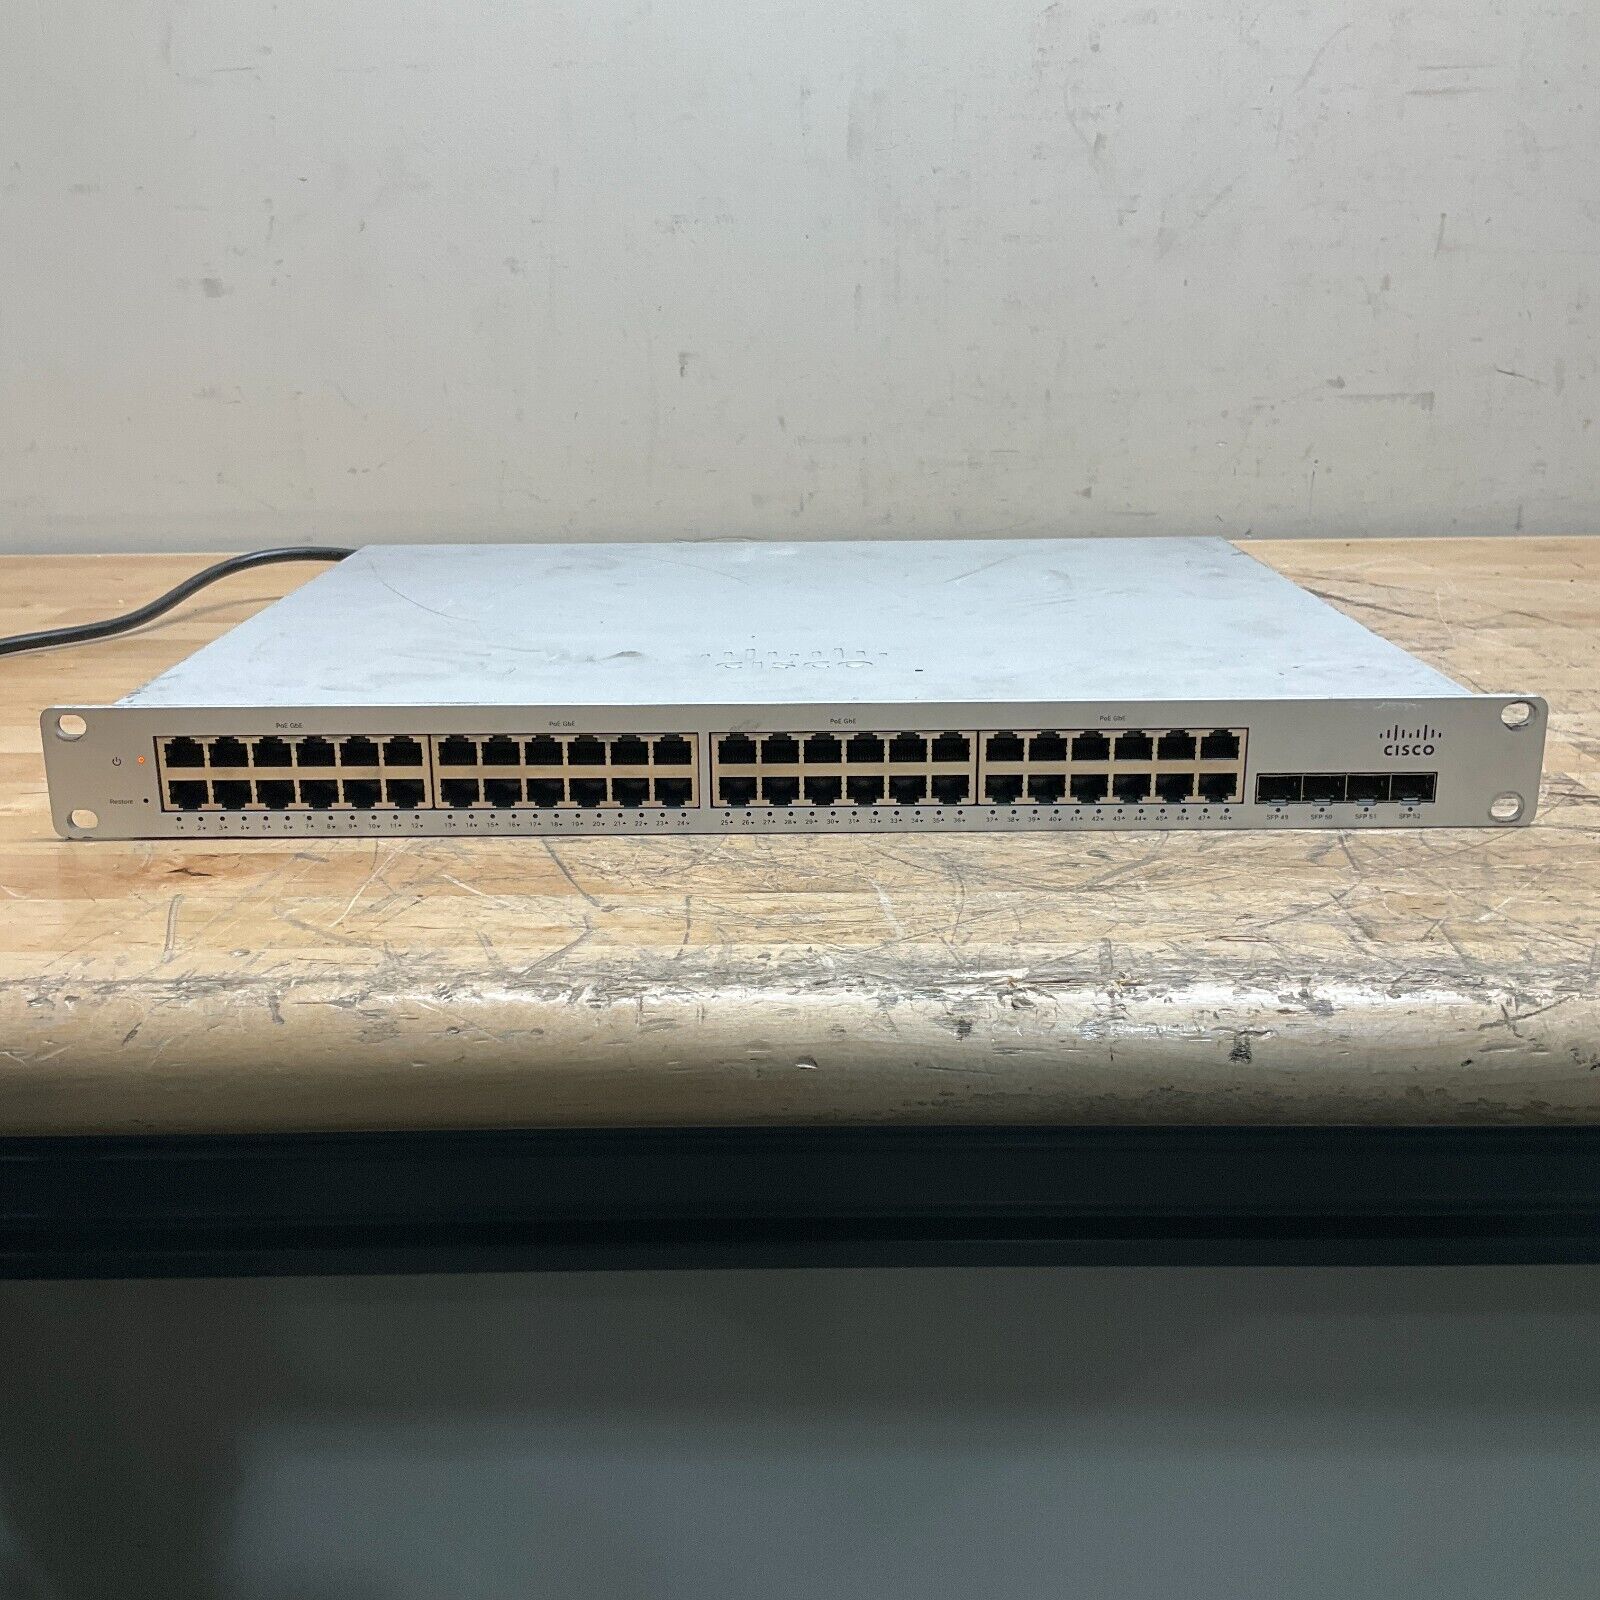 Meraki MS220-48LP Cloud Managed Switch UNCLAIMED Tested and Working